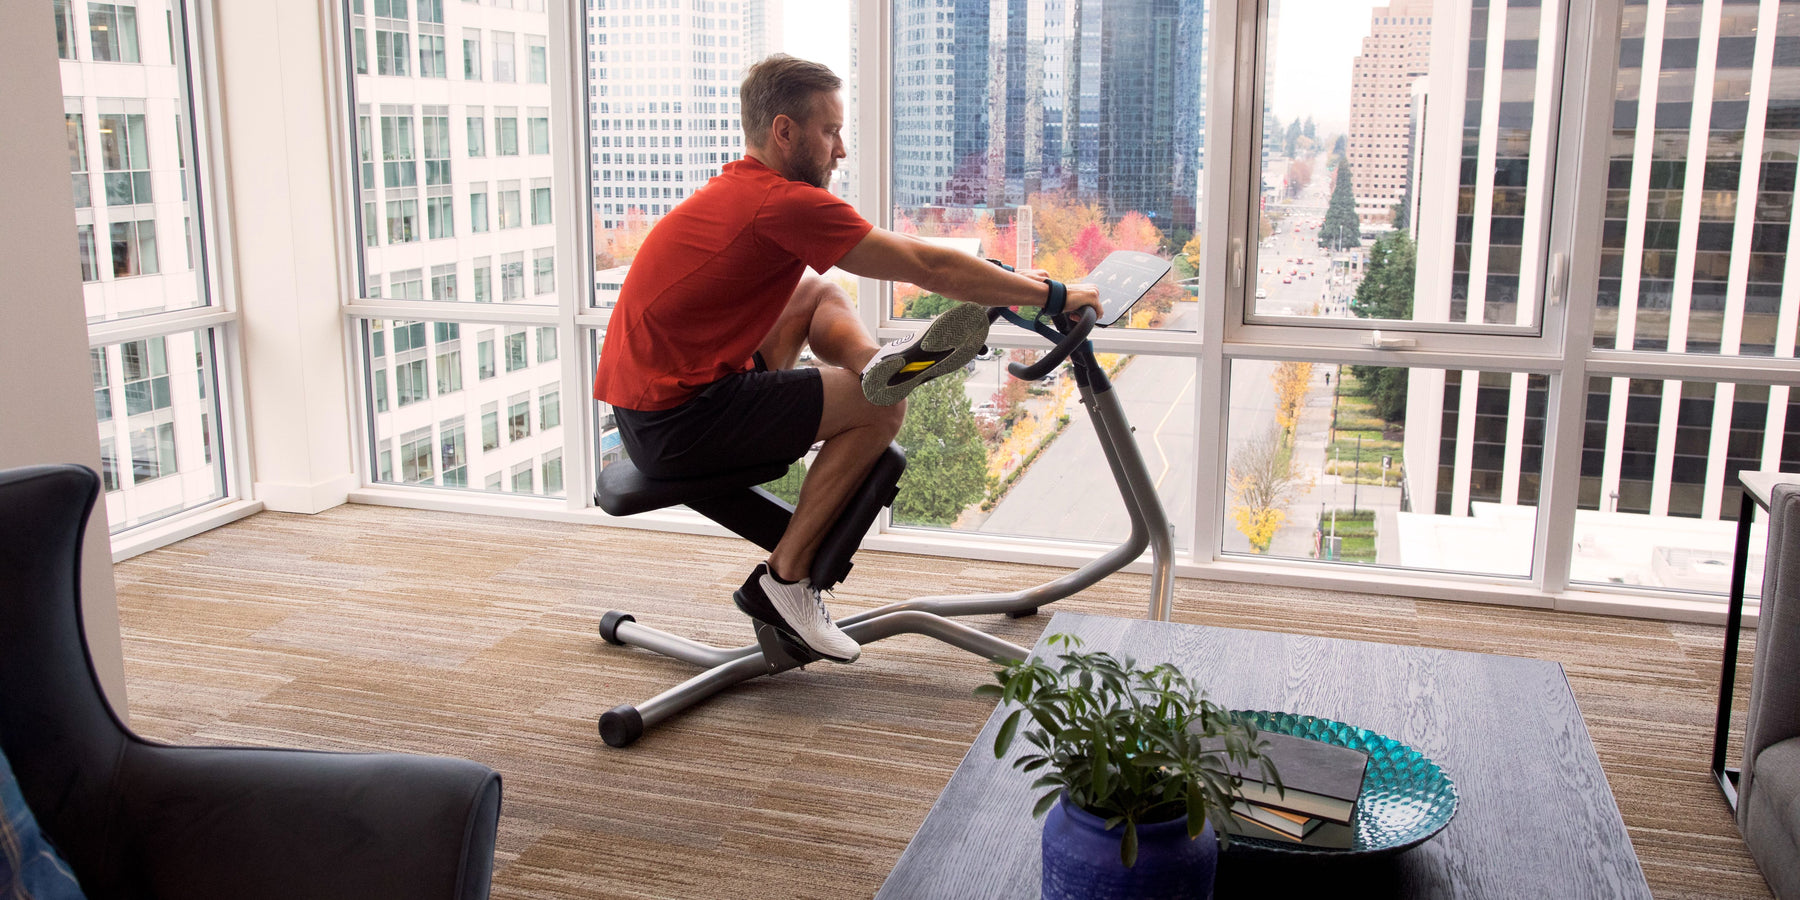 Male exerciser stretching on the Precor StretchTrainer 240i for flexibility and recovery